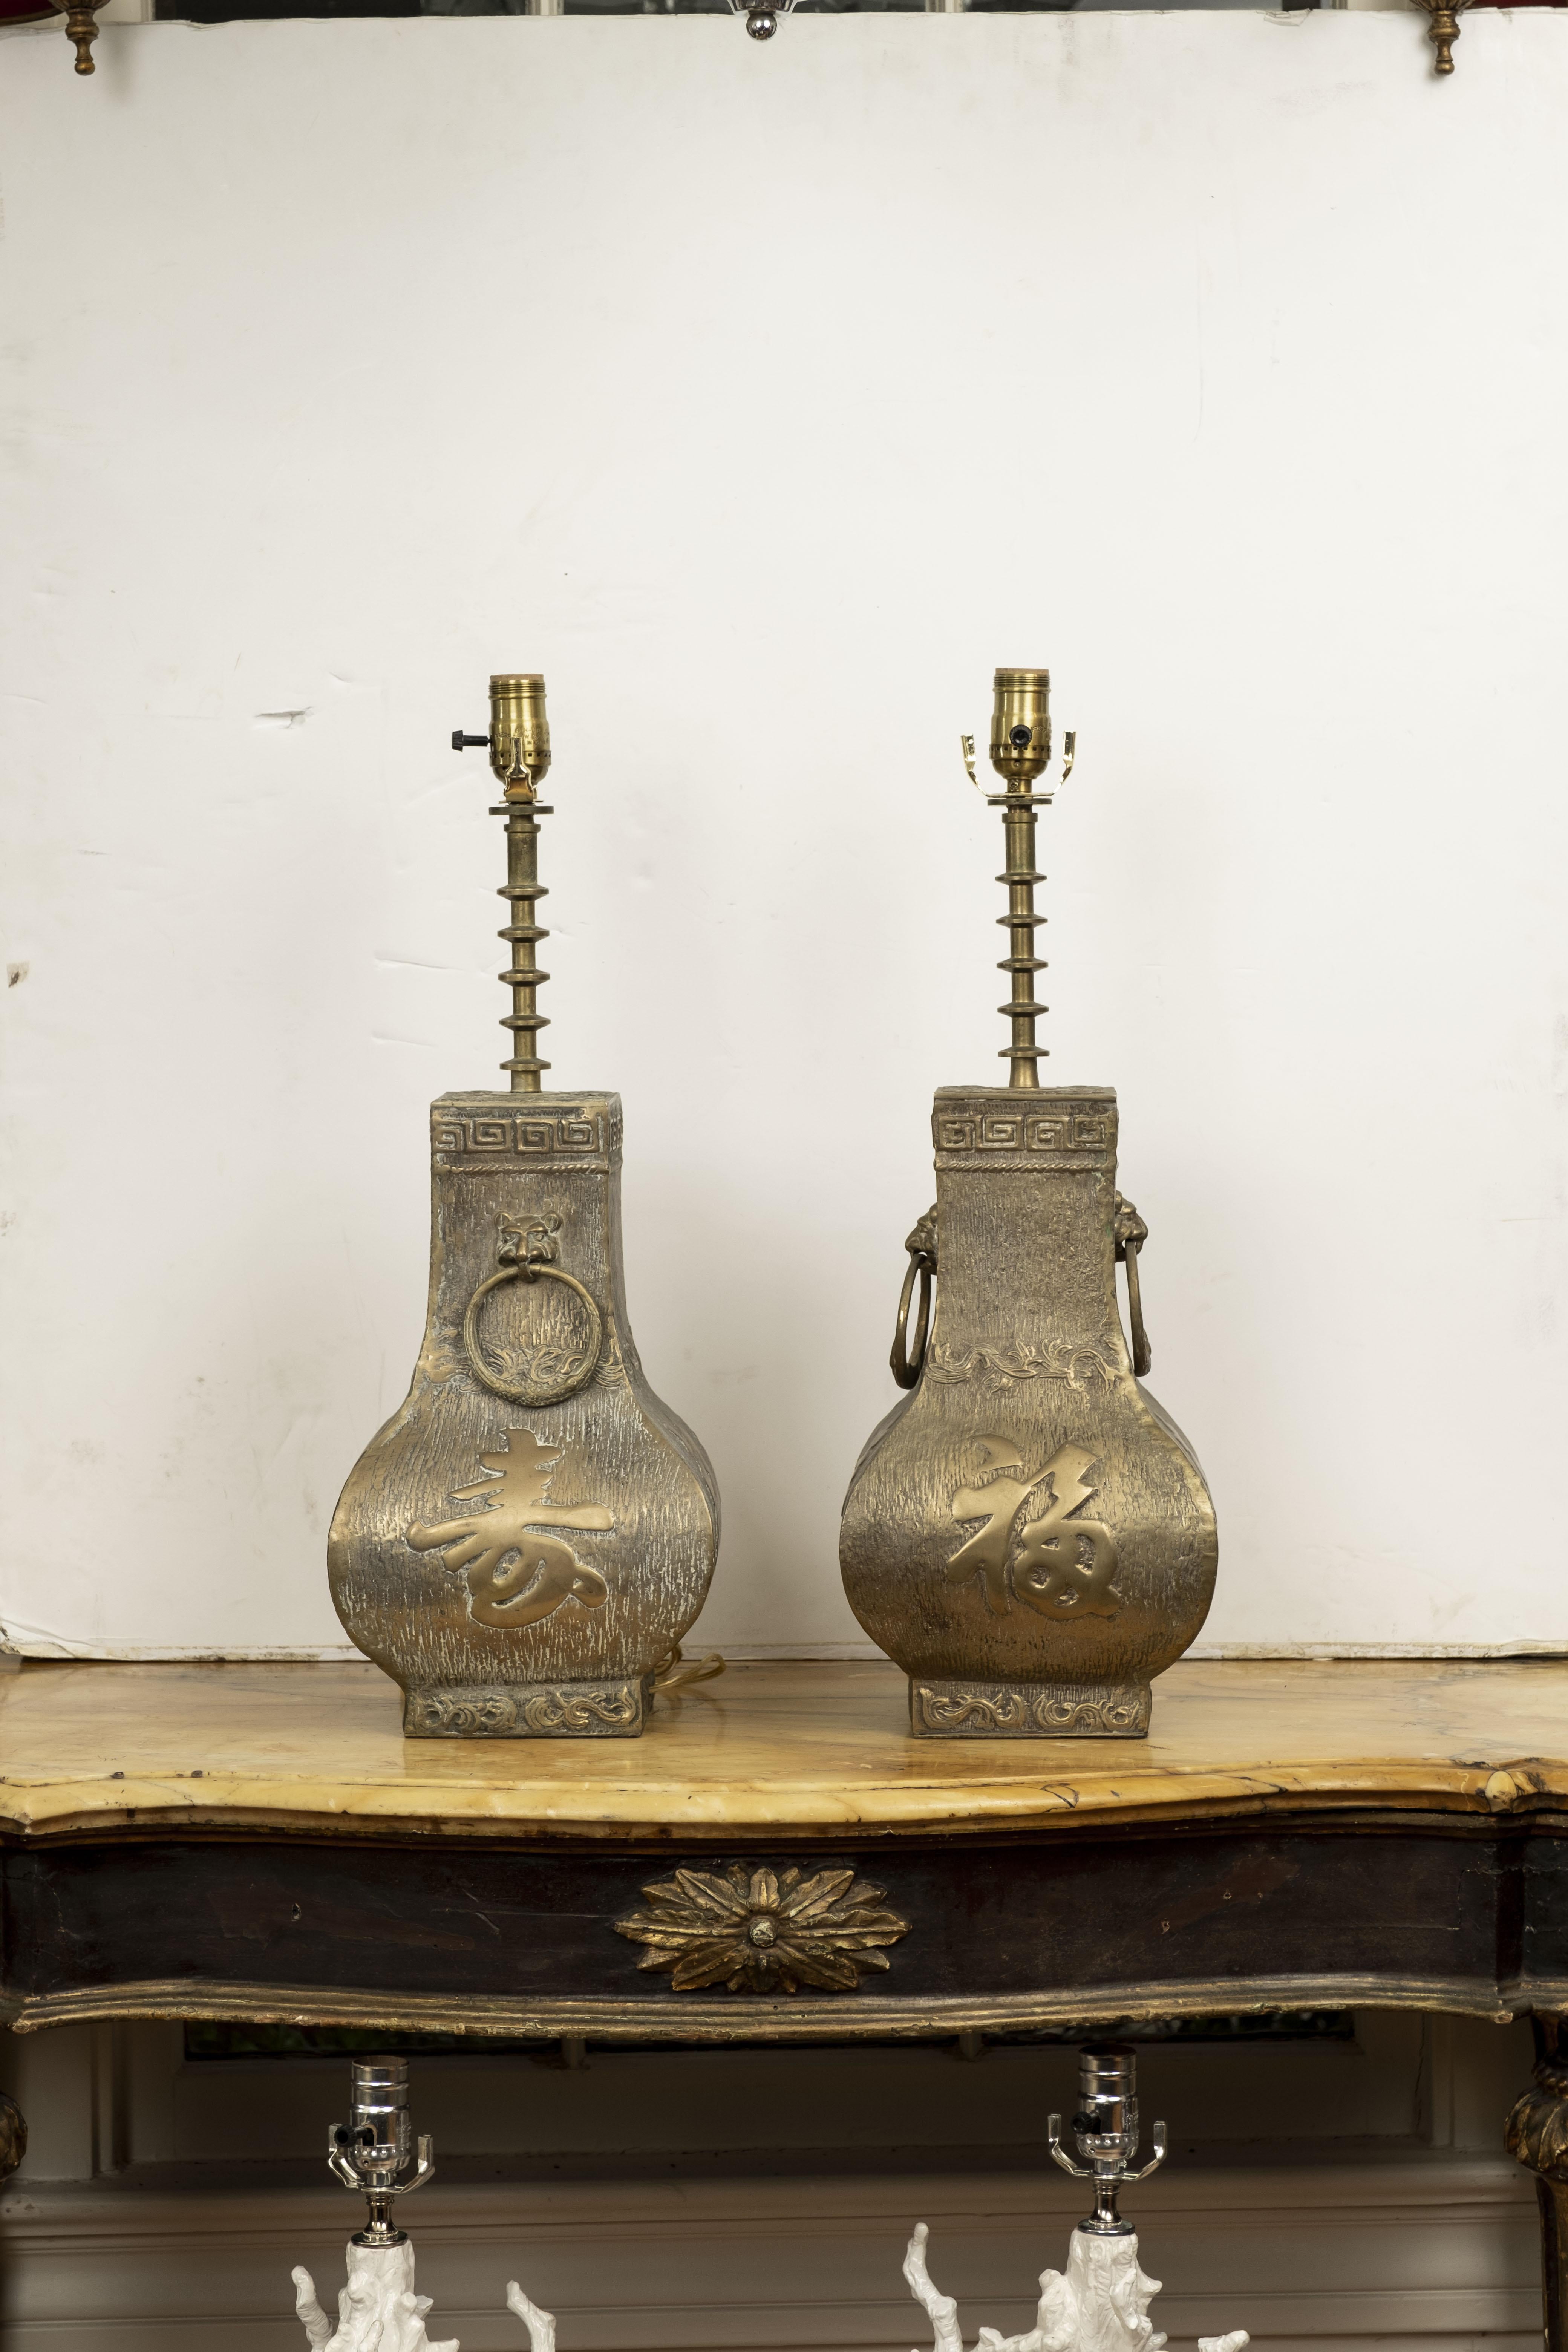 Pair of Asian Modern brass lamps by James Mont. These stunning heavyweight Hollywood Regency brass lamps feature Chinese characters, Greek keys and lion heads handles. This great pair of midcentury brass lamps have been newly wired with new sockets